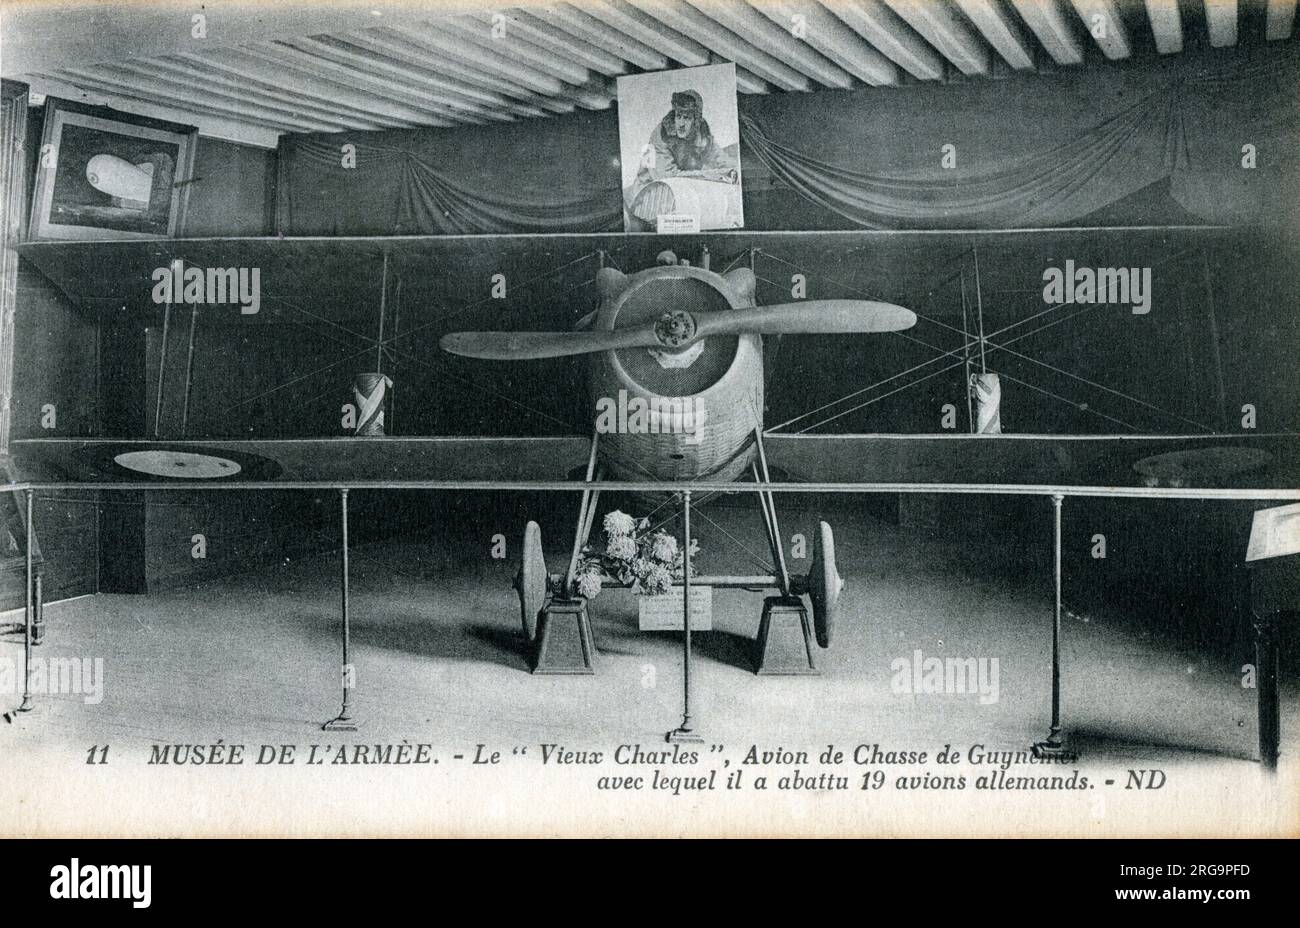 The original SPAD S.VII aircraft, nicknamed 'Vieux Charles', now preserved at Musée de l'Air et de l'Espace of French ace pilot Georges Guynemer (1894–1917), the second highest-scoring French fighter ace with 54 victories during World War I, and a French national hero at the time of his death. Stock Photo